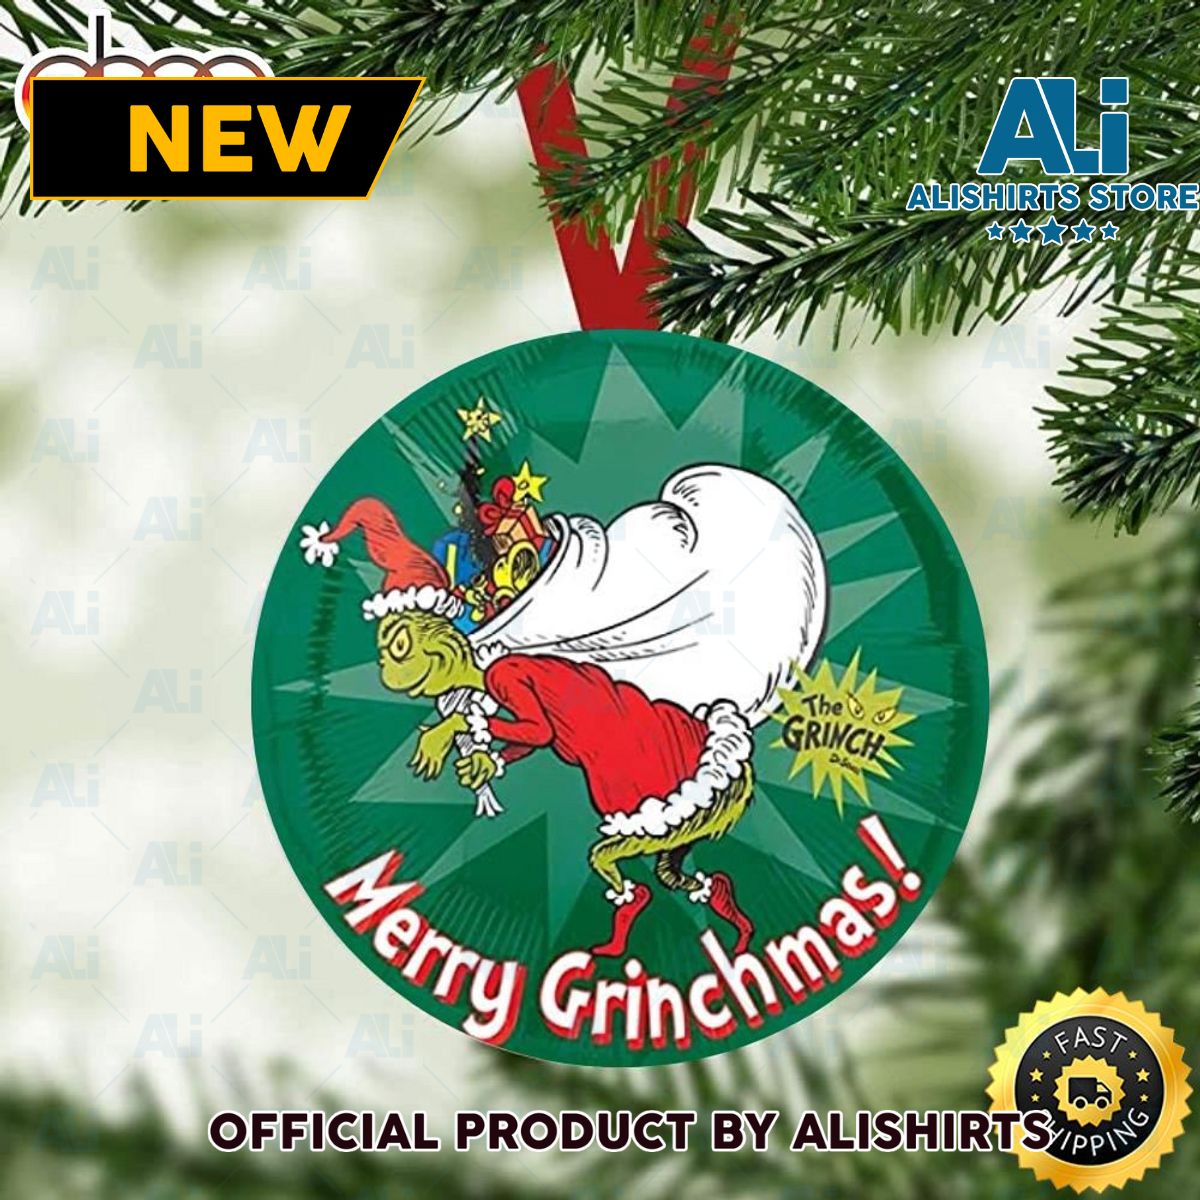 The Grinch Stole Christmas Merry Grinchmas Grinch Tree Ornament